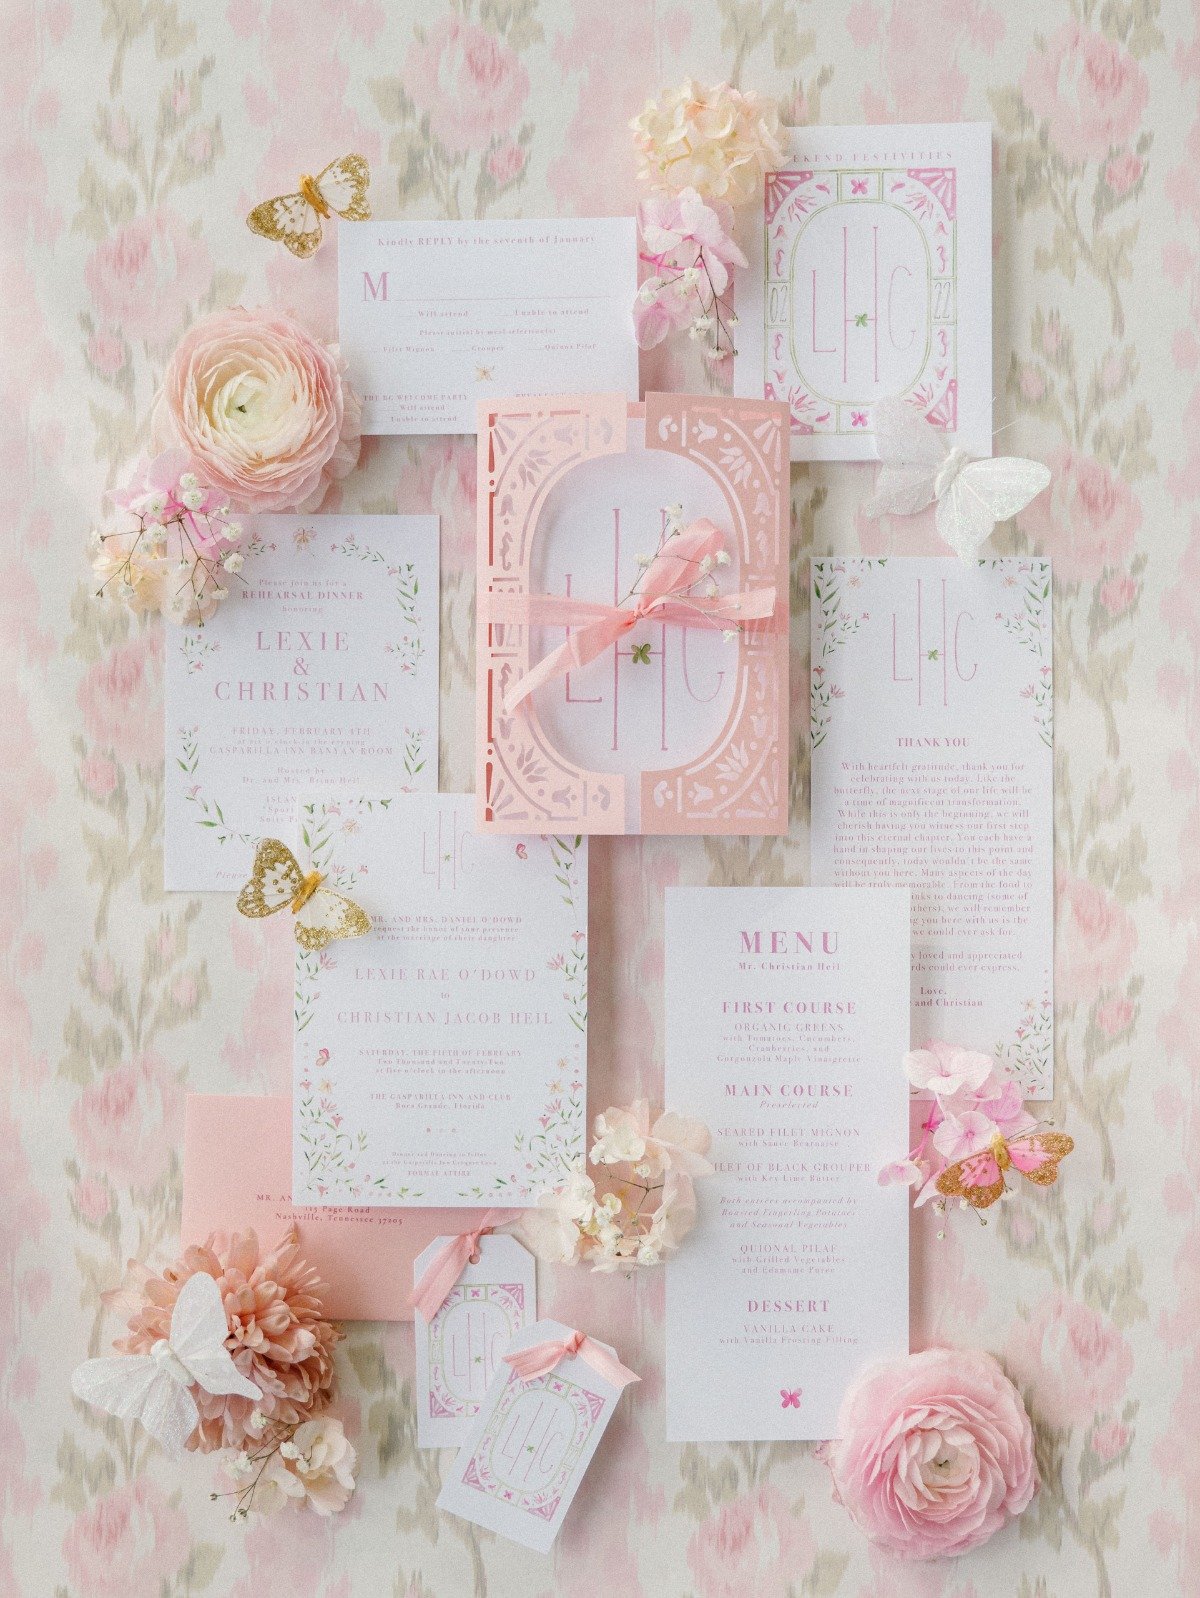 Aerial image of wedding invitations and stationery